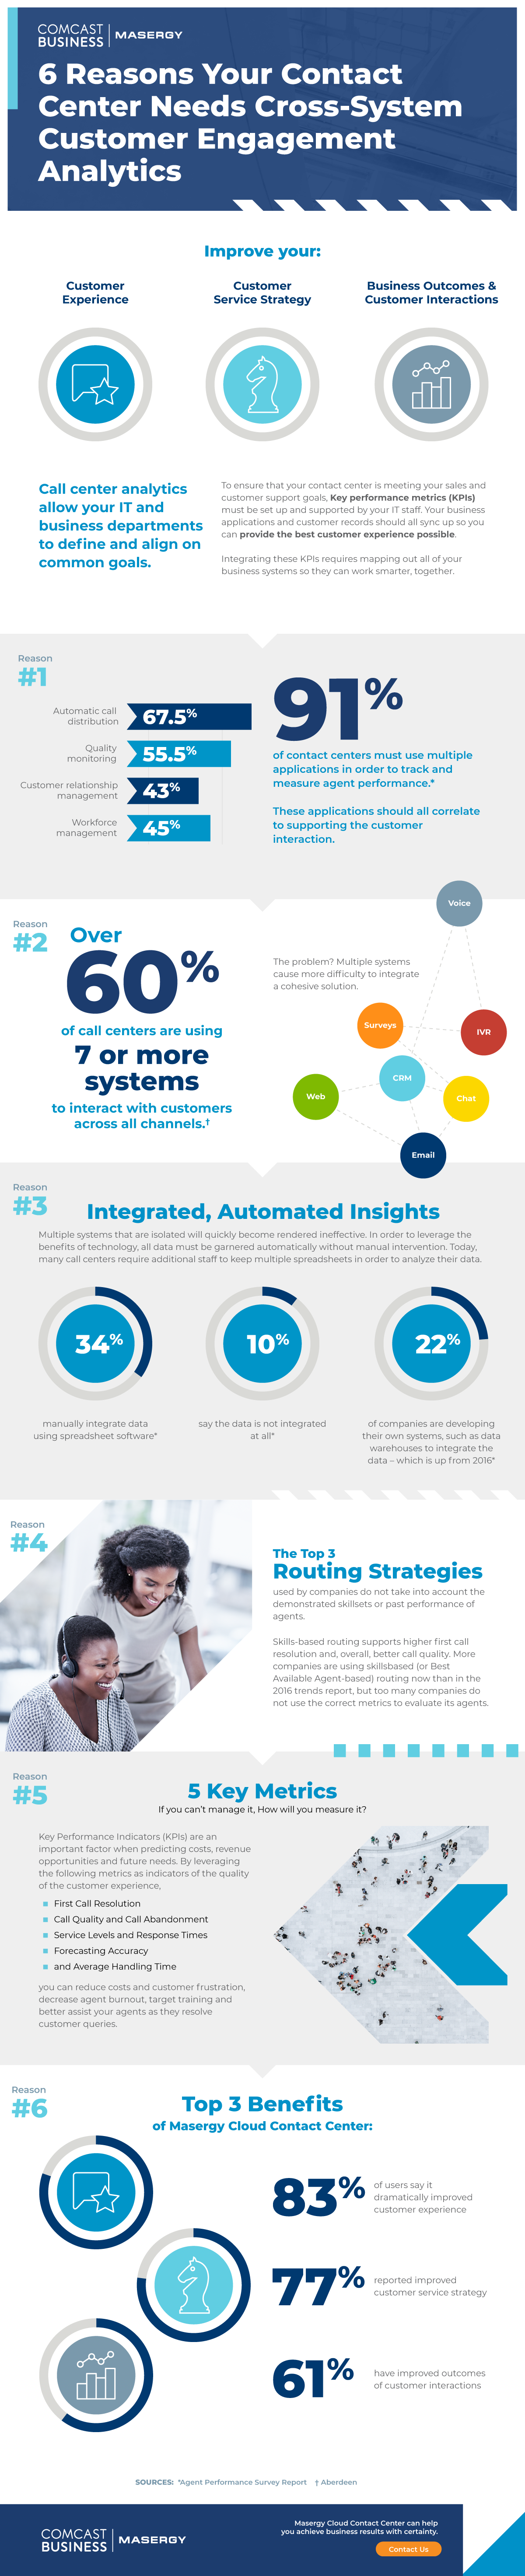 Infographic: 6 Reasons Your Contact Center Needs Cross-System Customer Engagement Analytics